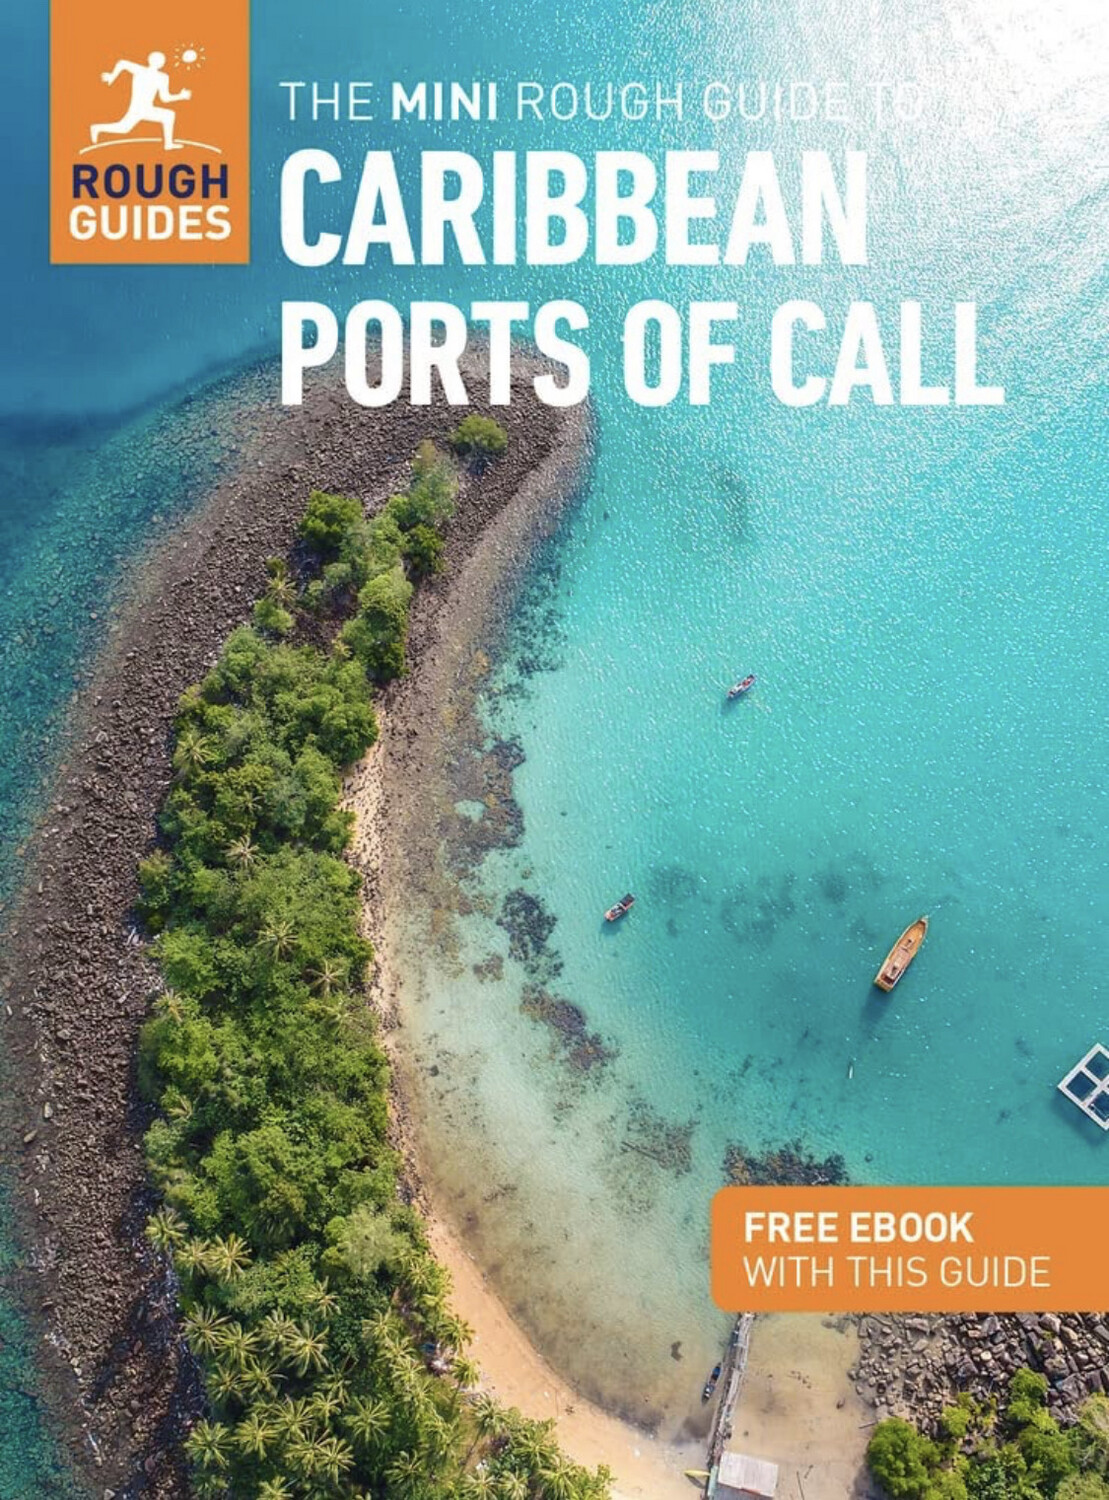 The mini rough guide to Caribbean Ports of Call